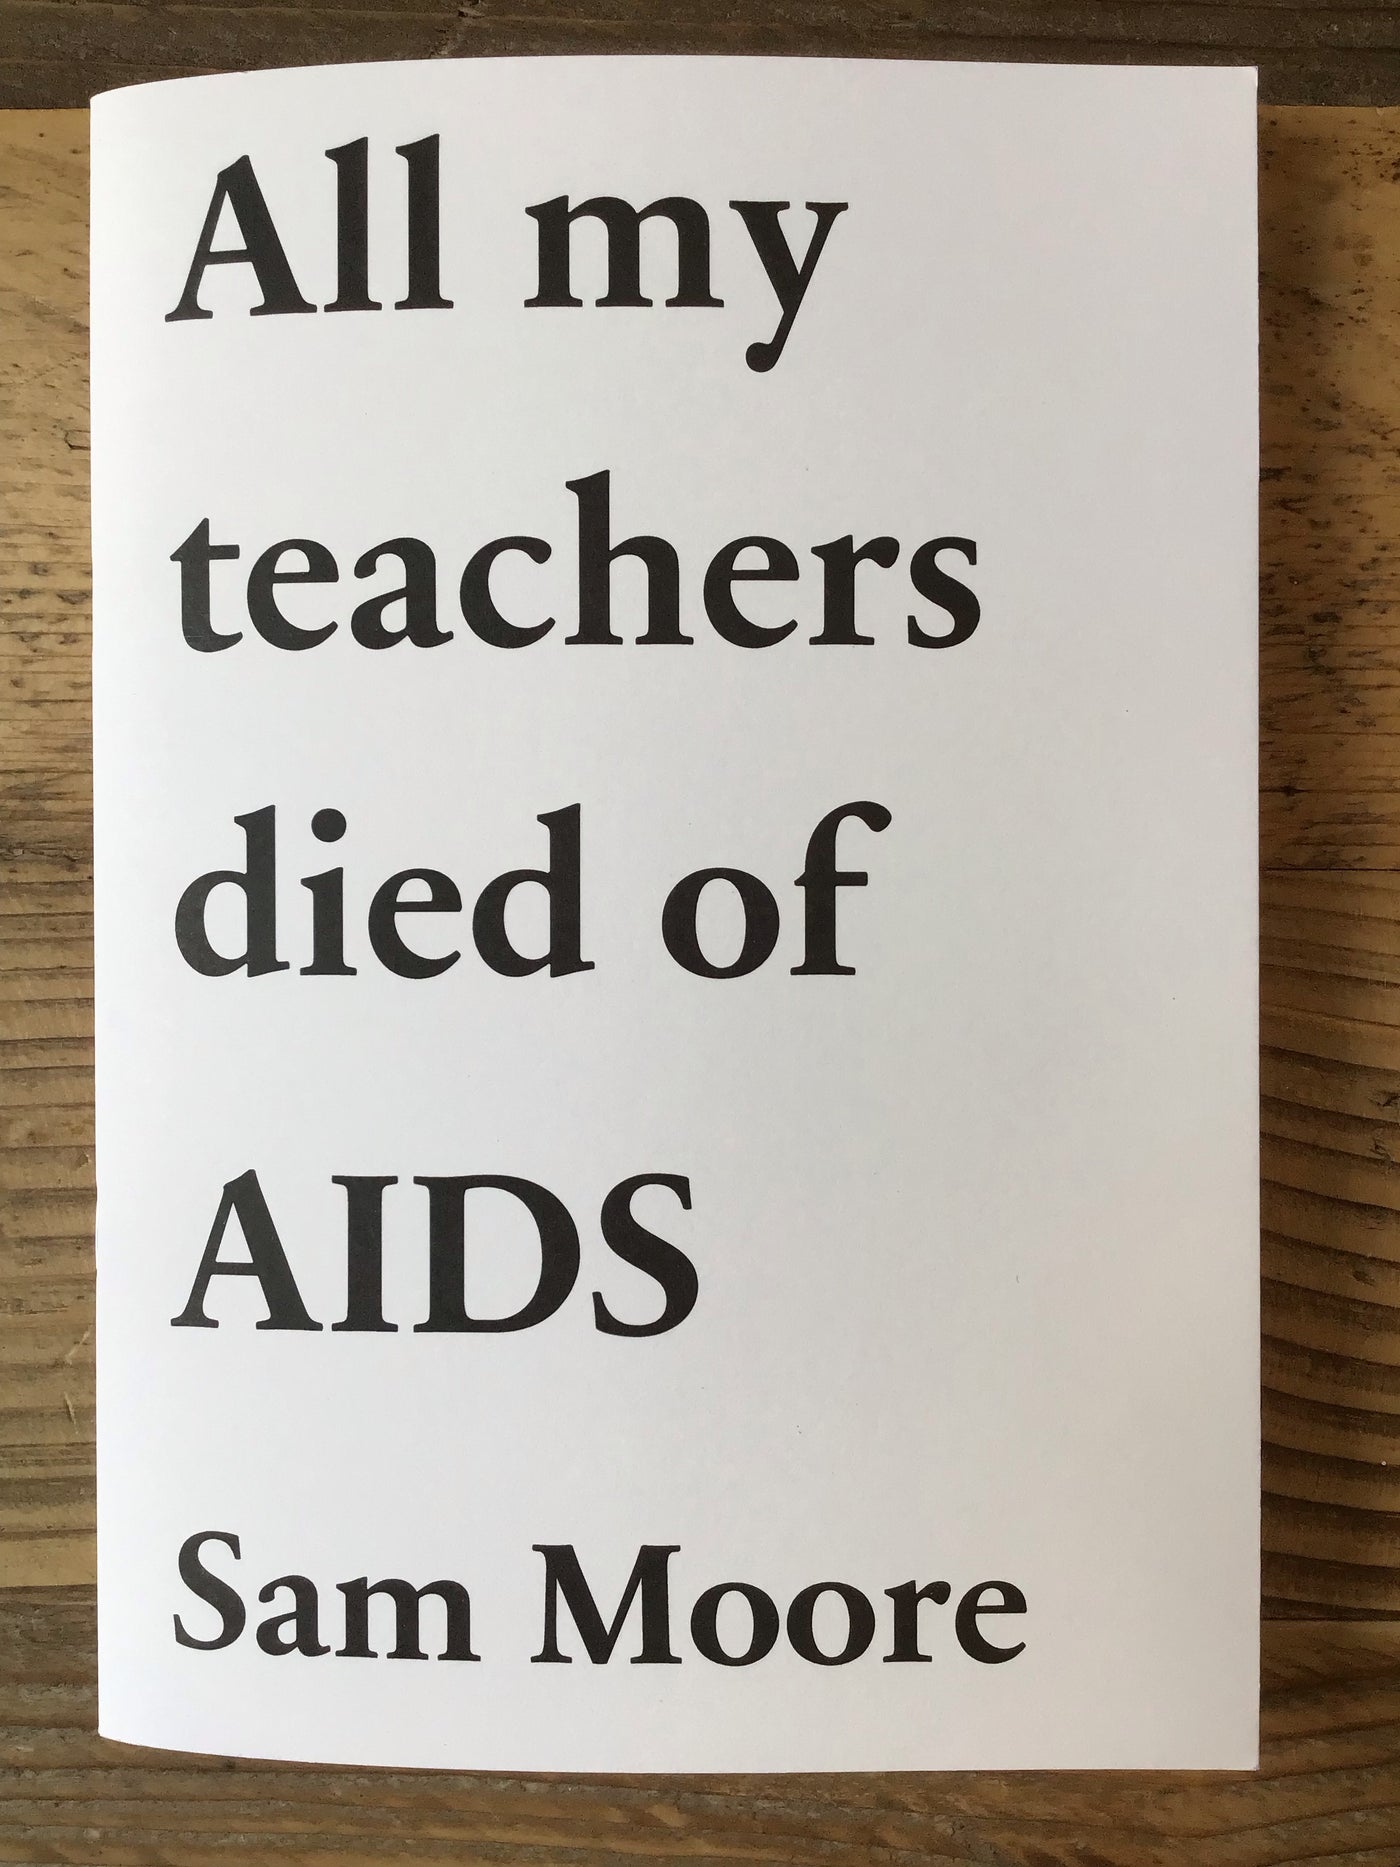 All my teachers died of AIDS